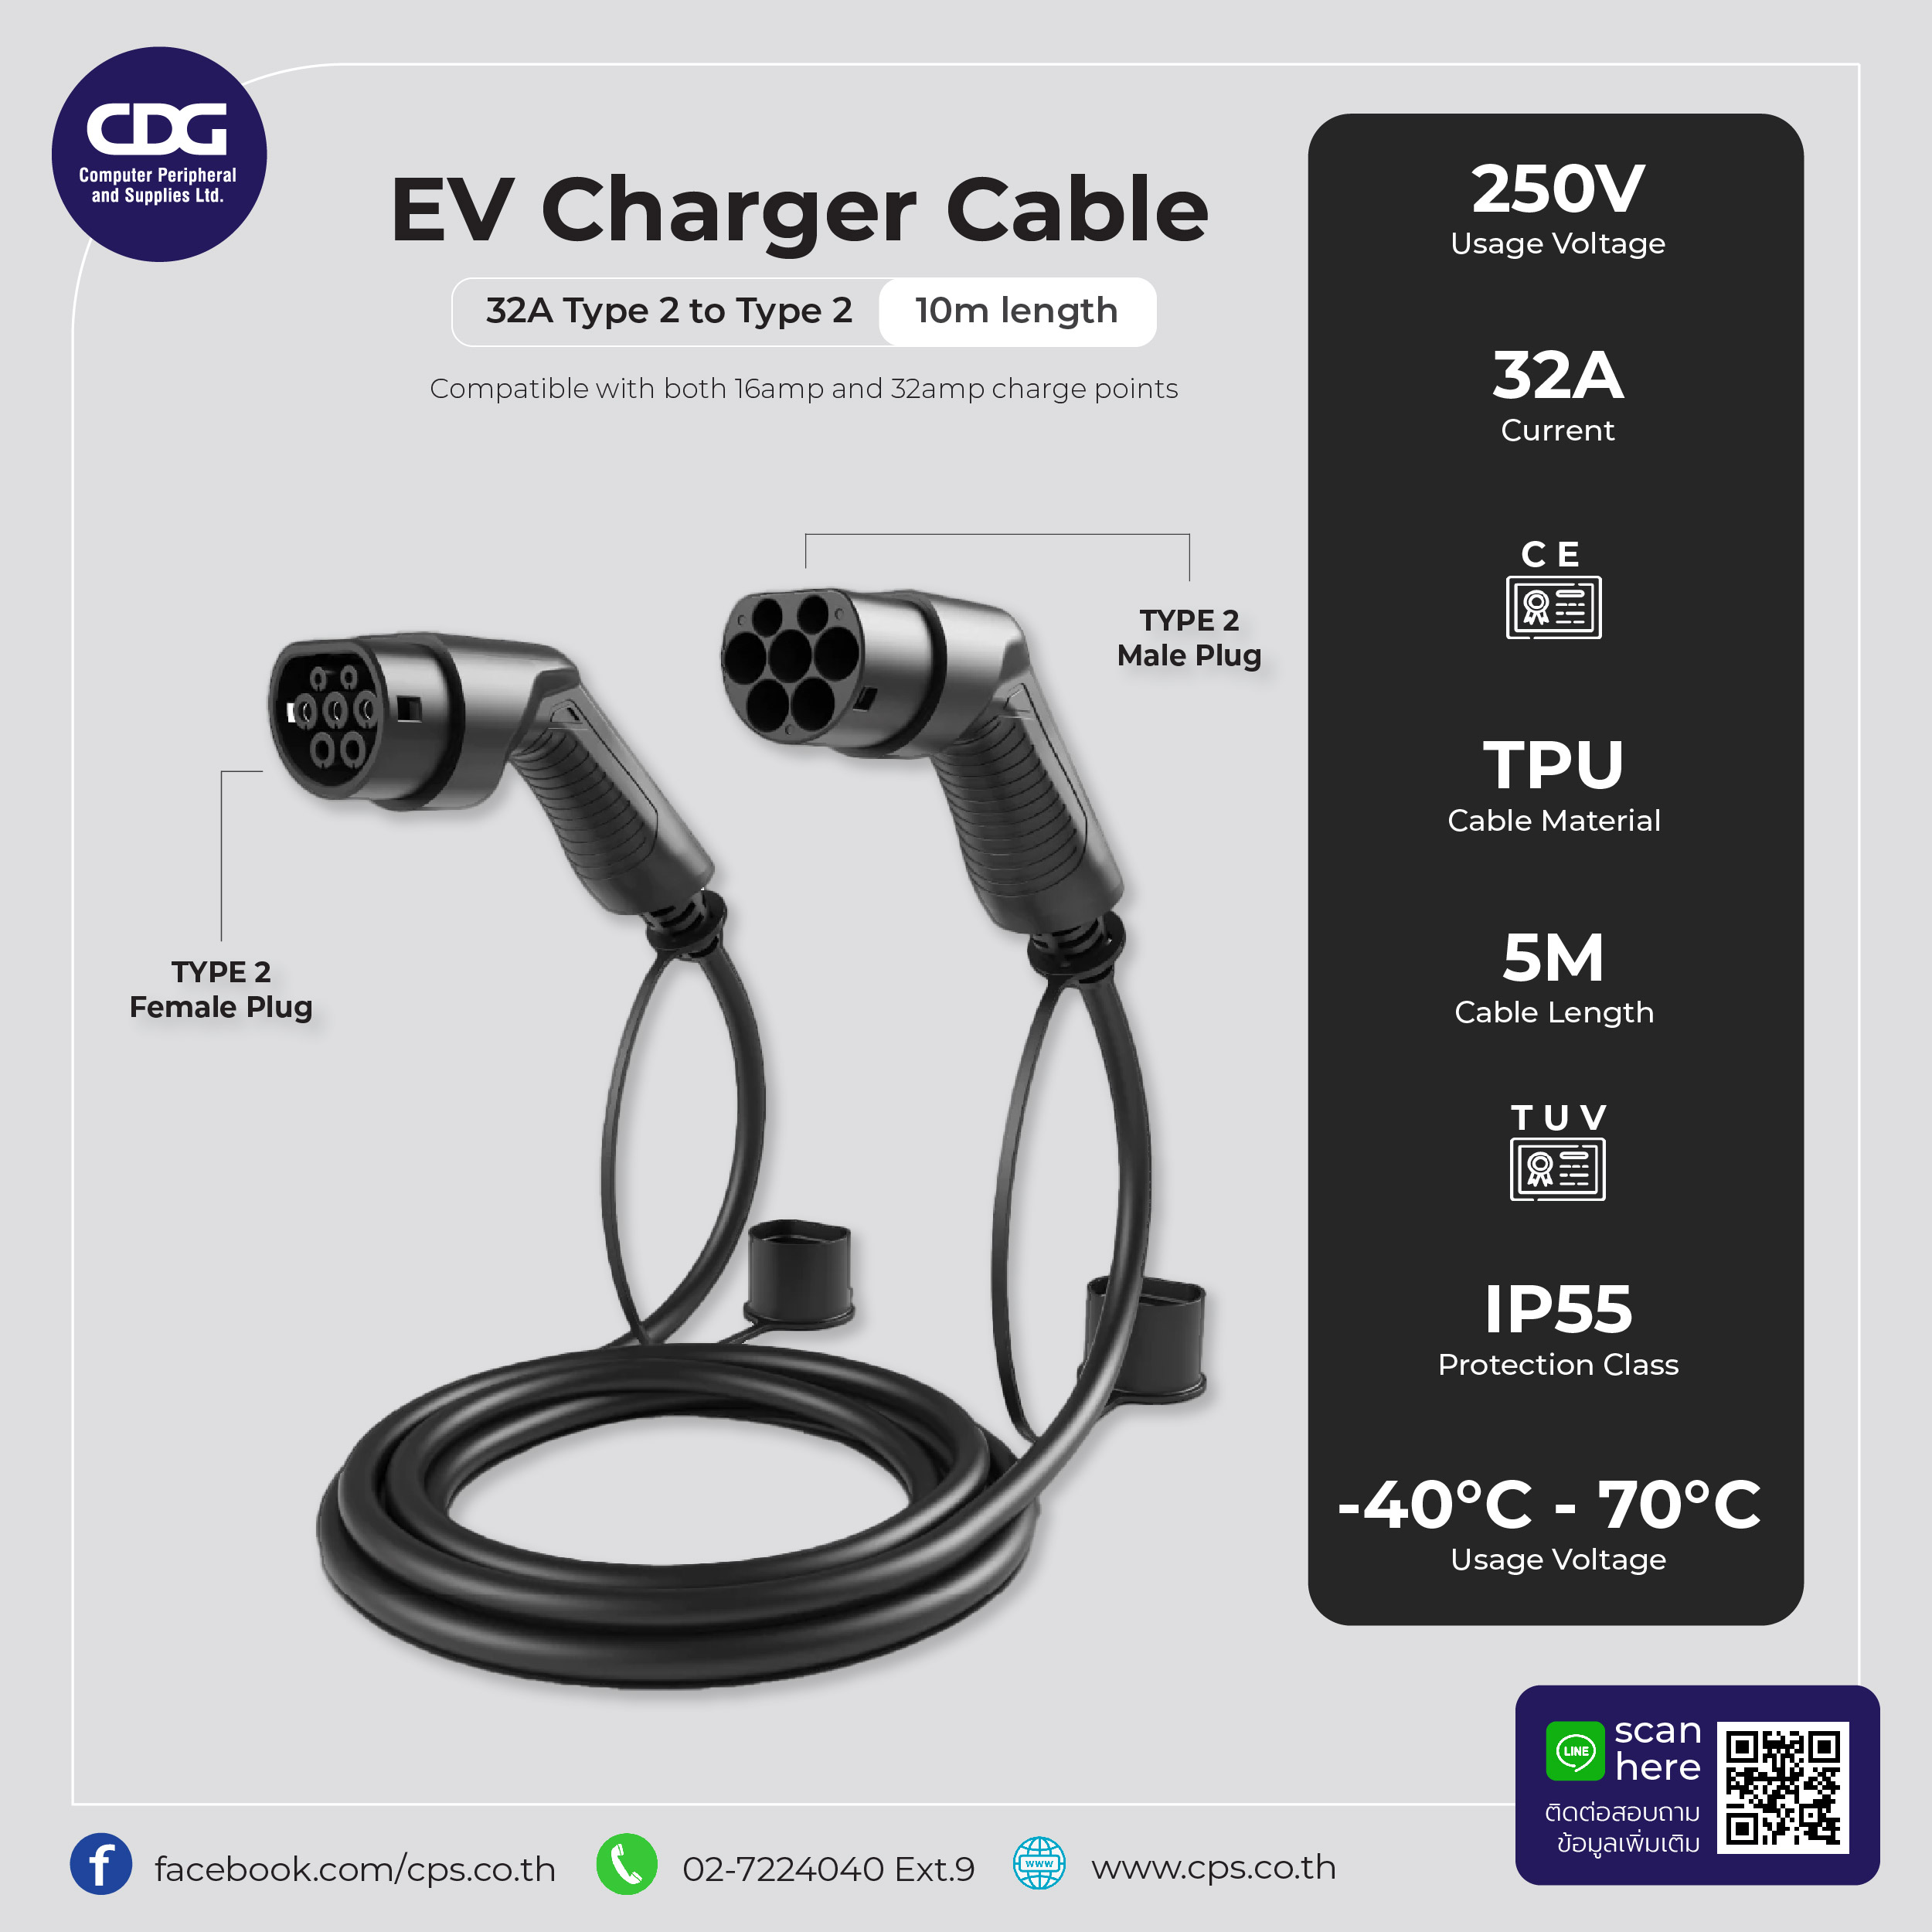 Type 2 to Type 2 Charging Cable, EV